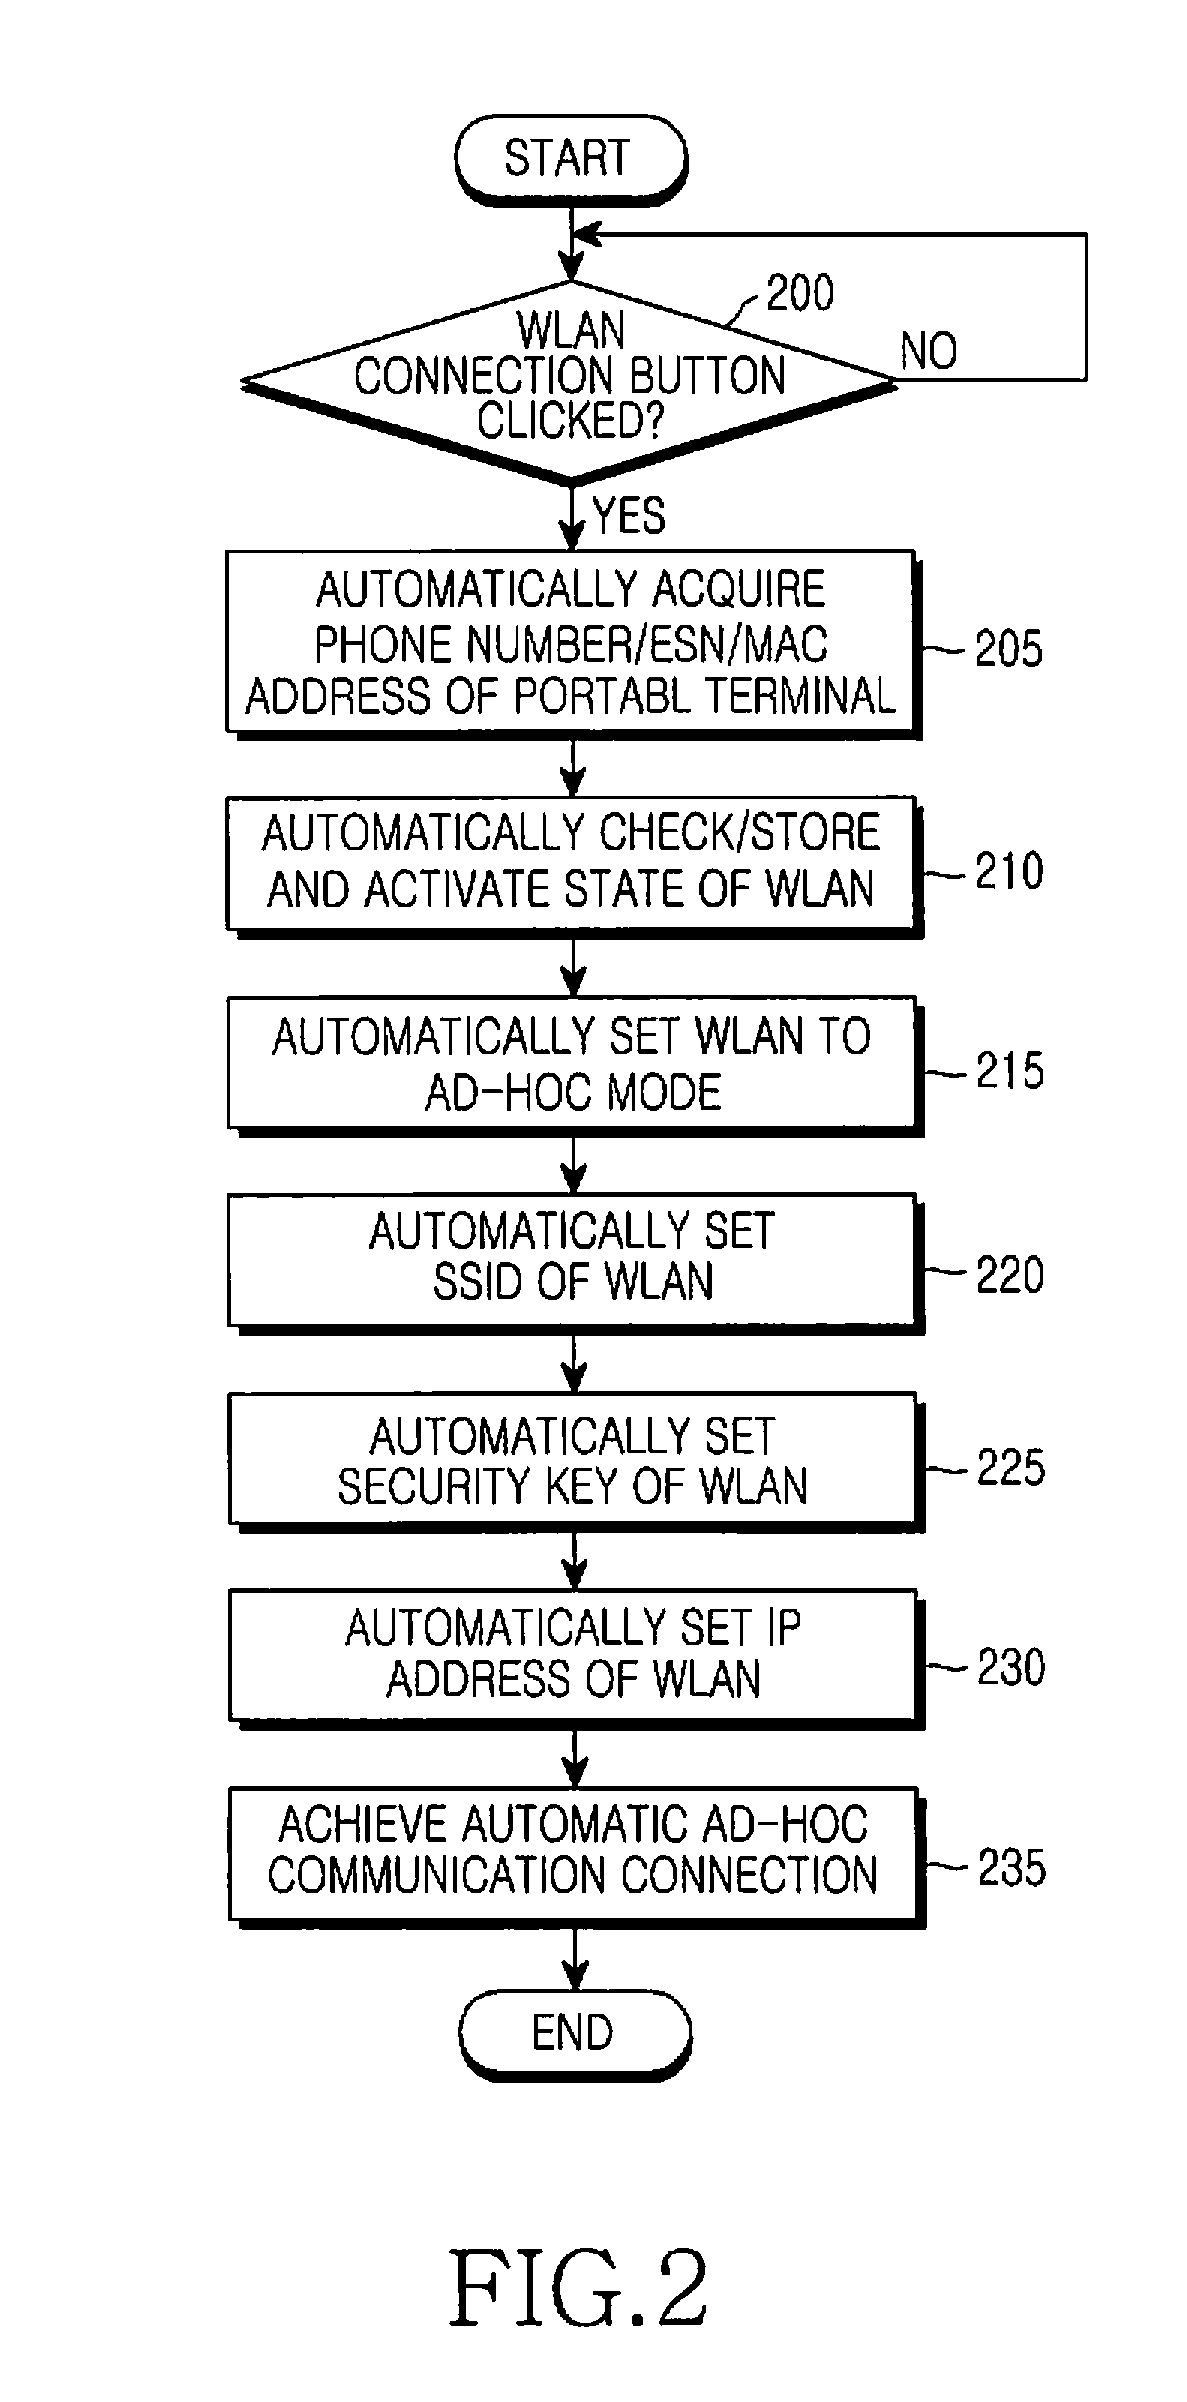 System and method for automatic wireless connection between a portable terminal and a digital device